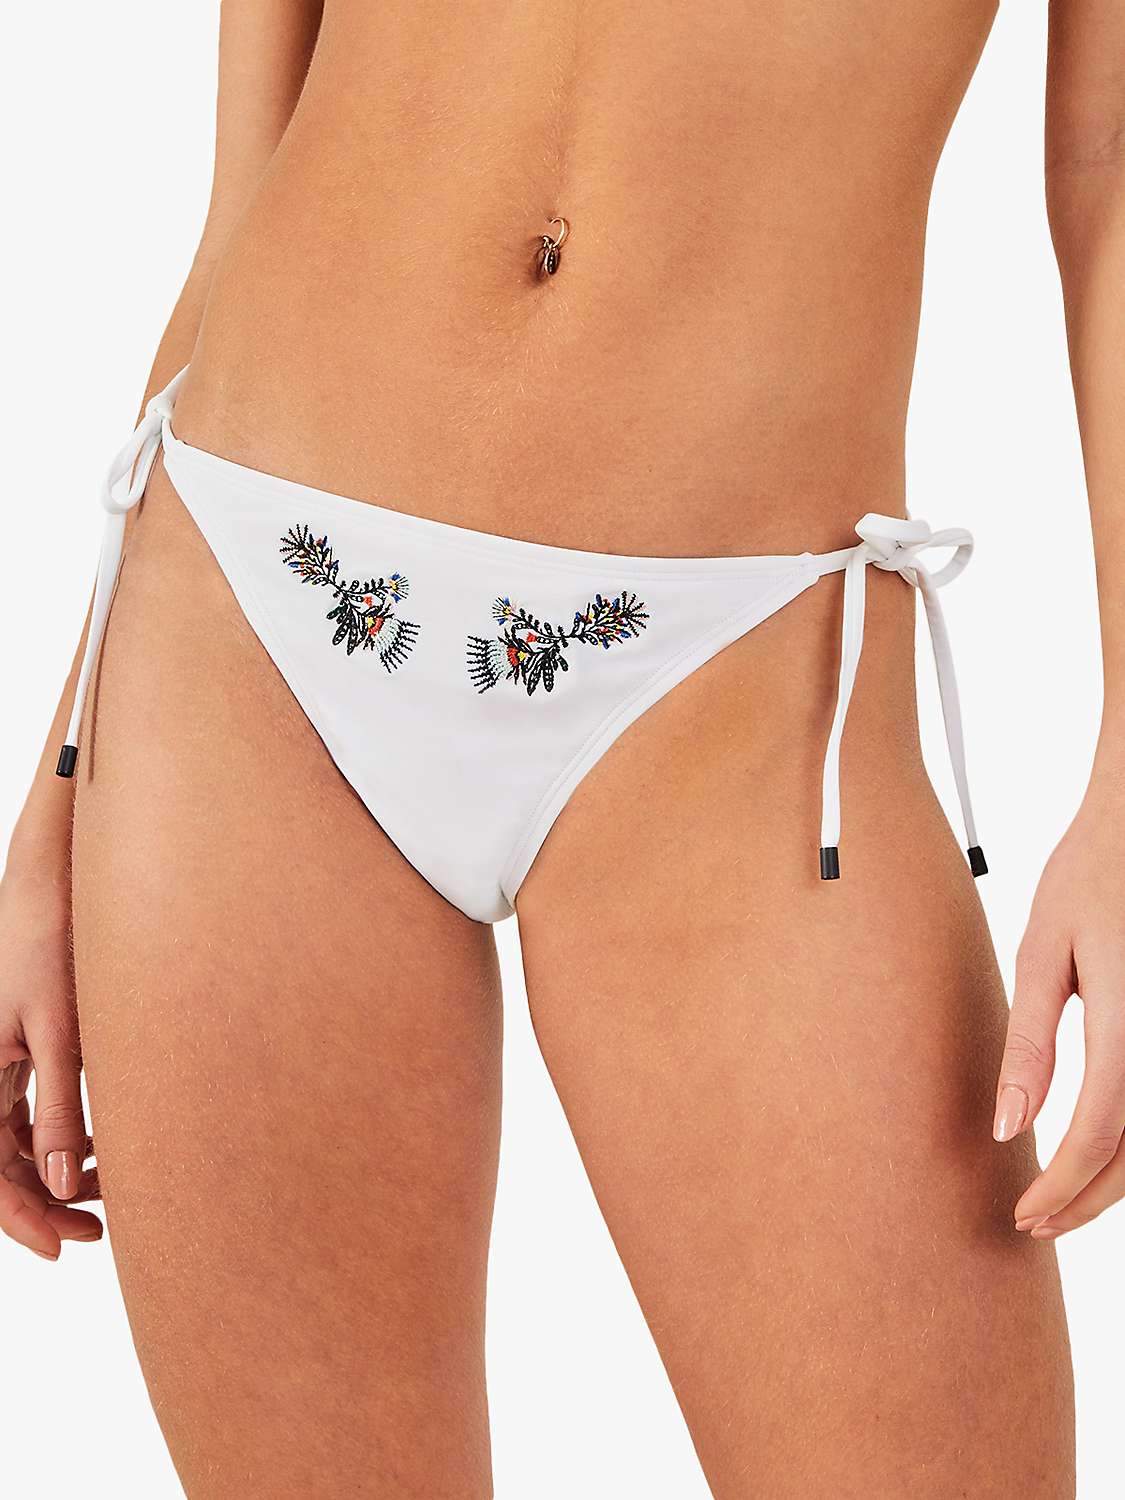 Buy Accessorize Embroidered Fan Tie Side Bikini Bottoms, White Online at johnlewis.com